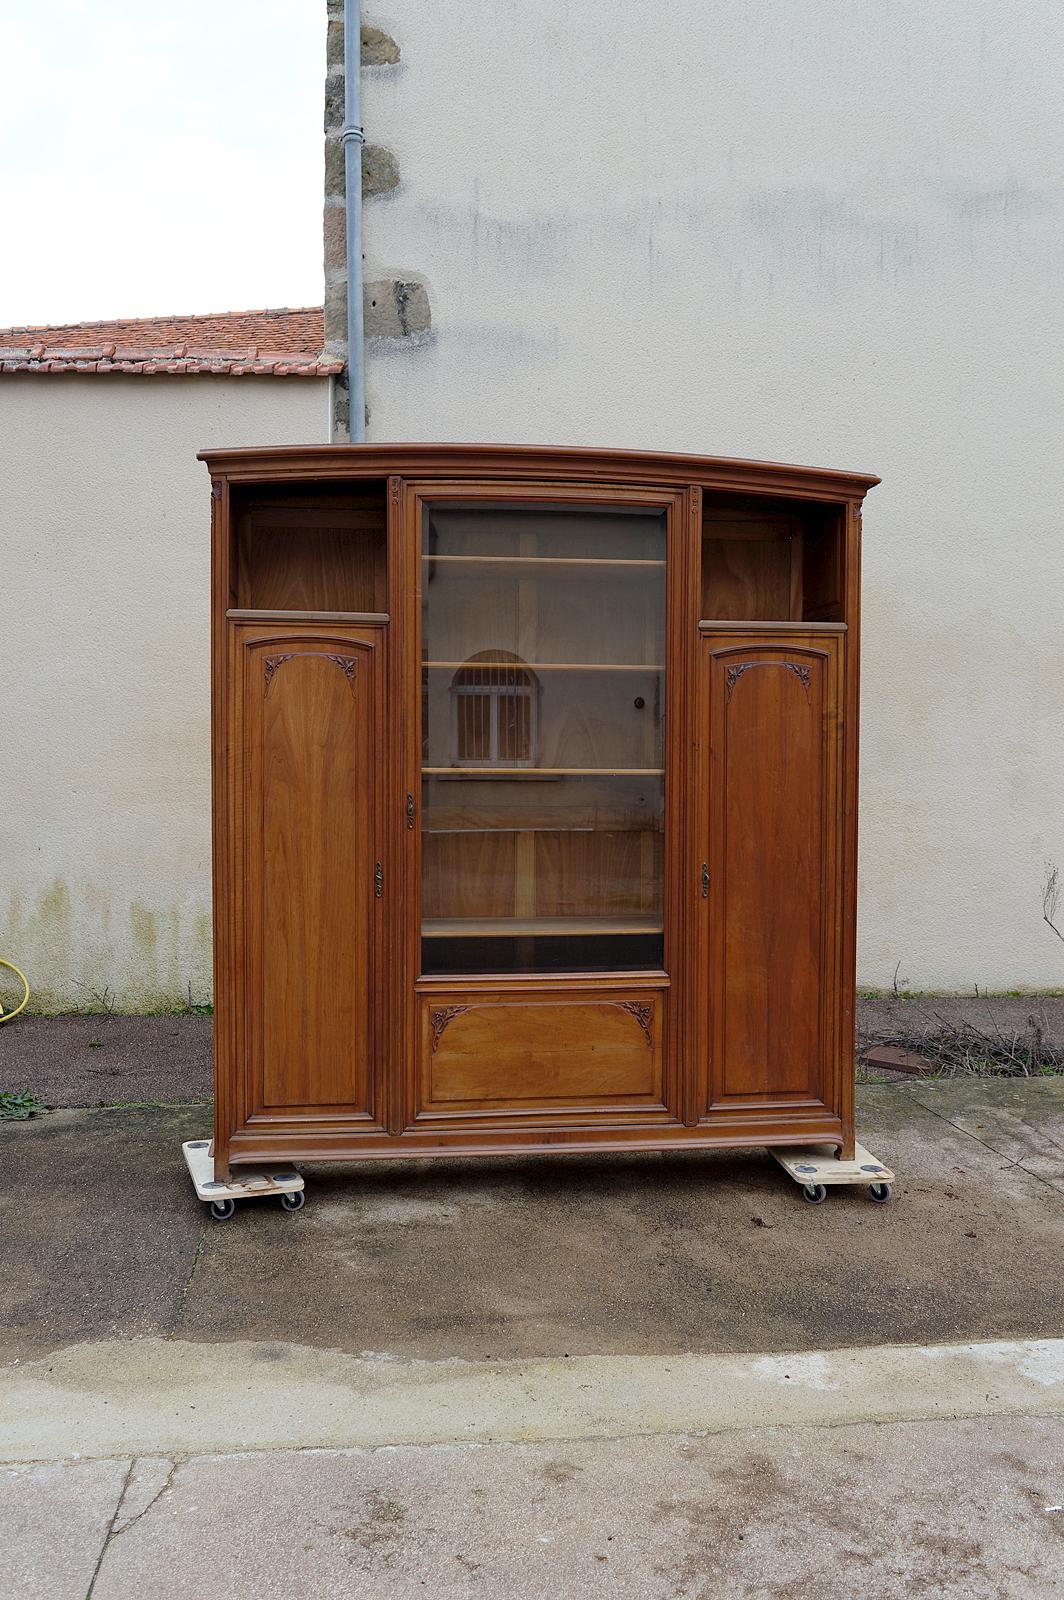 Art Nouveau walnut bookcase / display case, circa 1910

Attributed to Louis Majorelle

In carved walnut. Beveled glass door.

Locks + keys OK.
Pretty furnishing bronzes.

Bad condition: gaps and defects (feet, cornices).

Glass part: 4